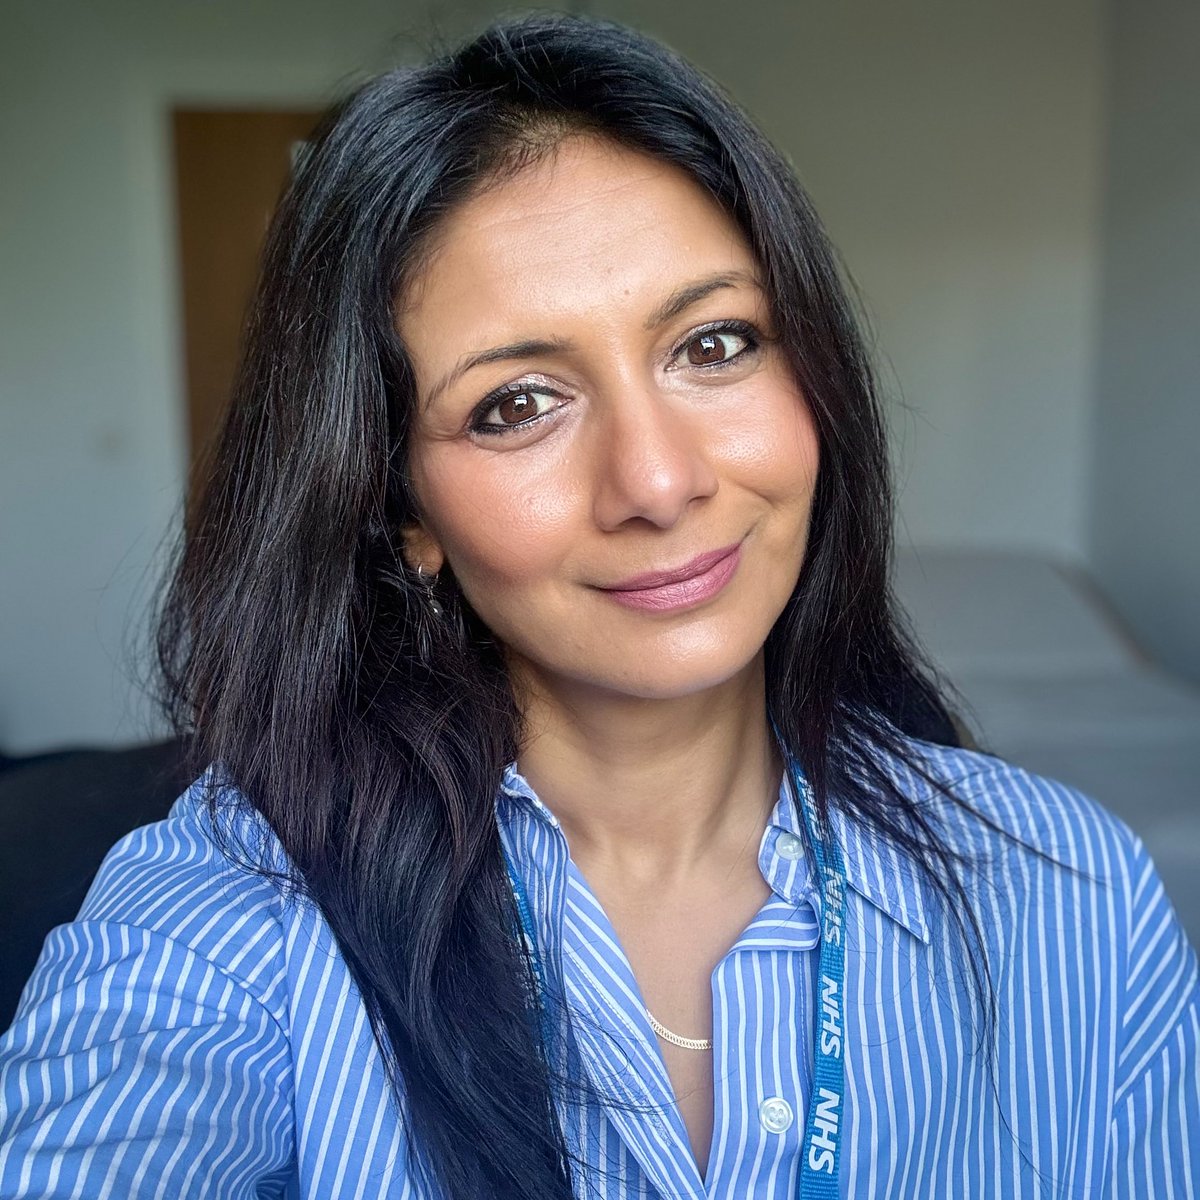 GP Anisha went to her own GP after experiencing tummy pains and changes to her poo. After further tests, she was diagnosed with stage 3 bowel cancer. Her tumour was completely removed, and she is now cancer-free! #BowelCancerAwarenessMonth